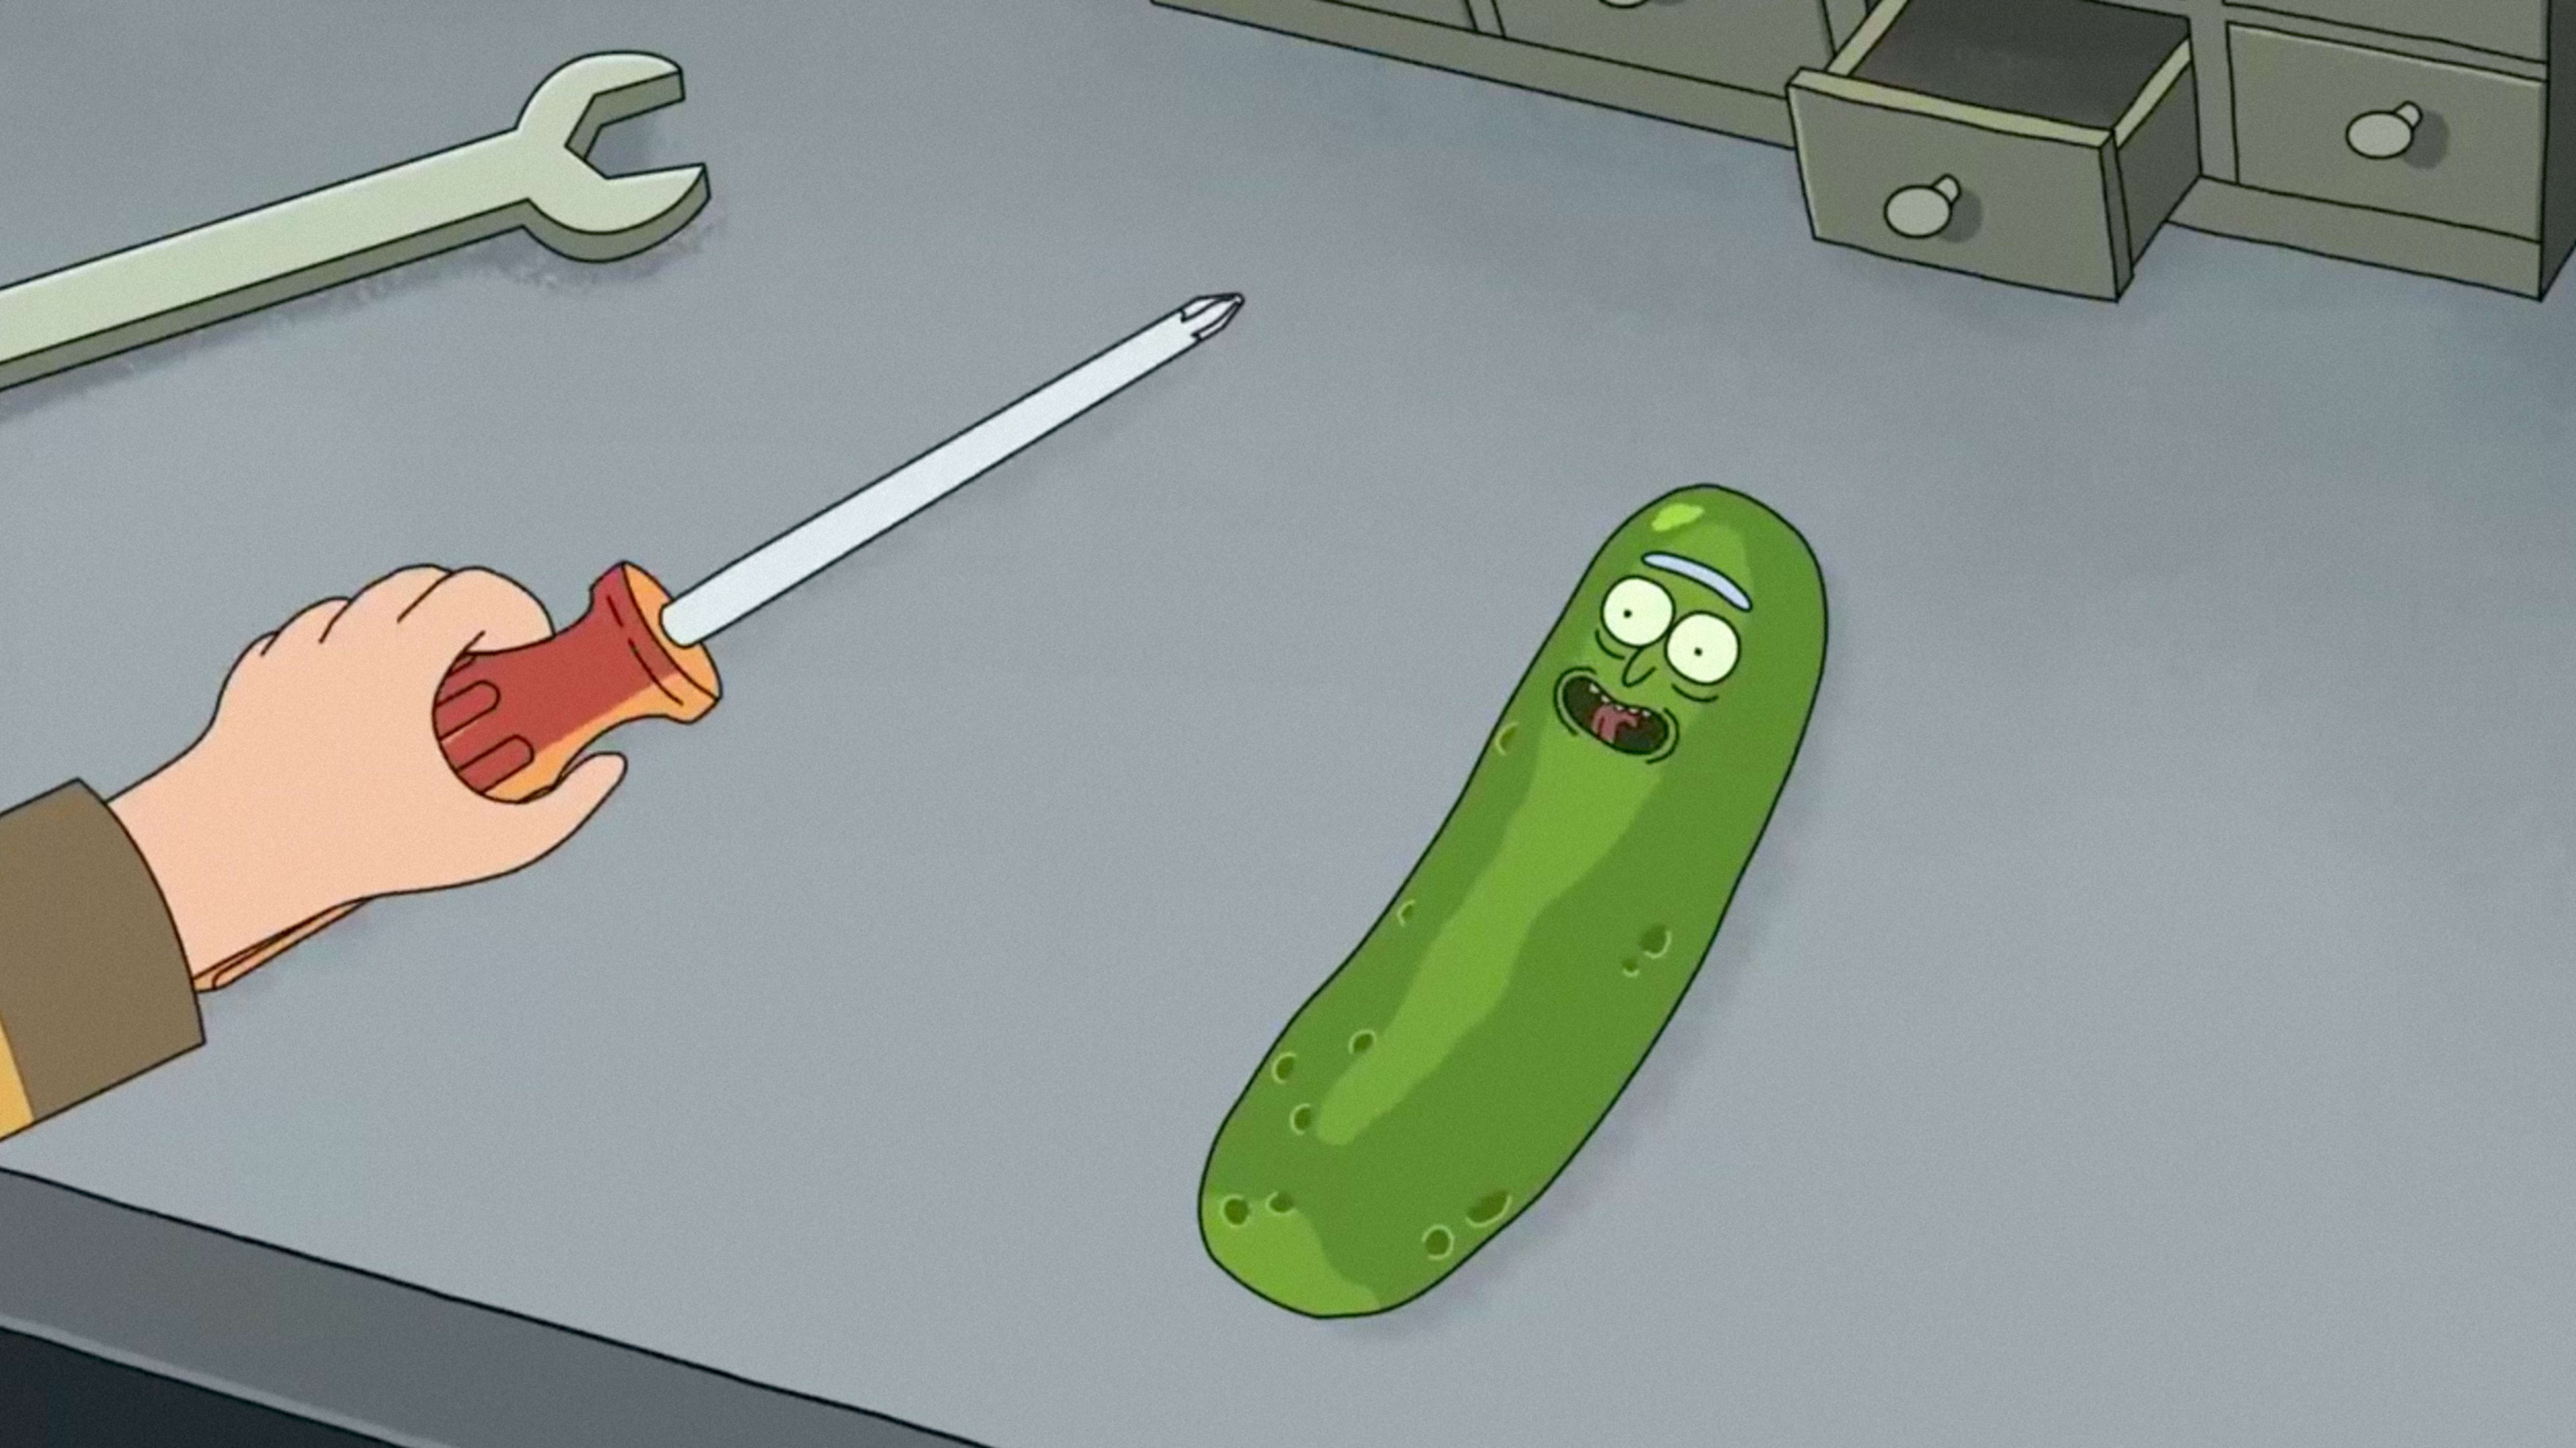 Pickle Rick and Space Prison: Inside “Rick and Morty” Season 3 With Dan Harmon